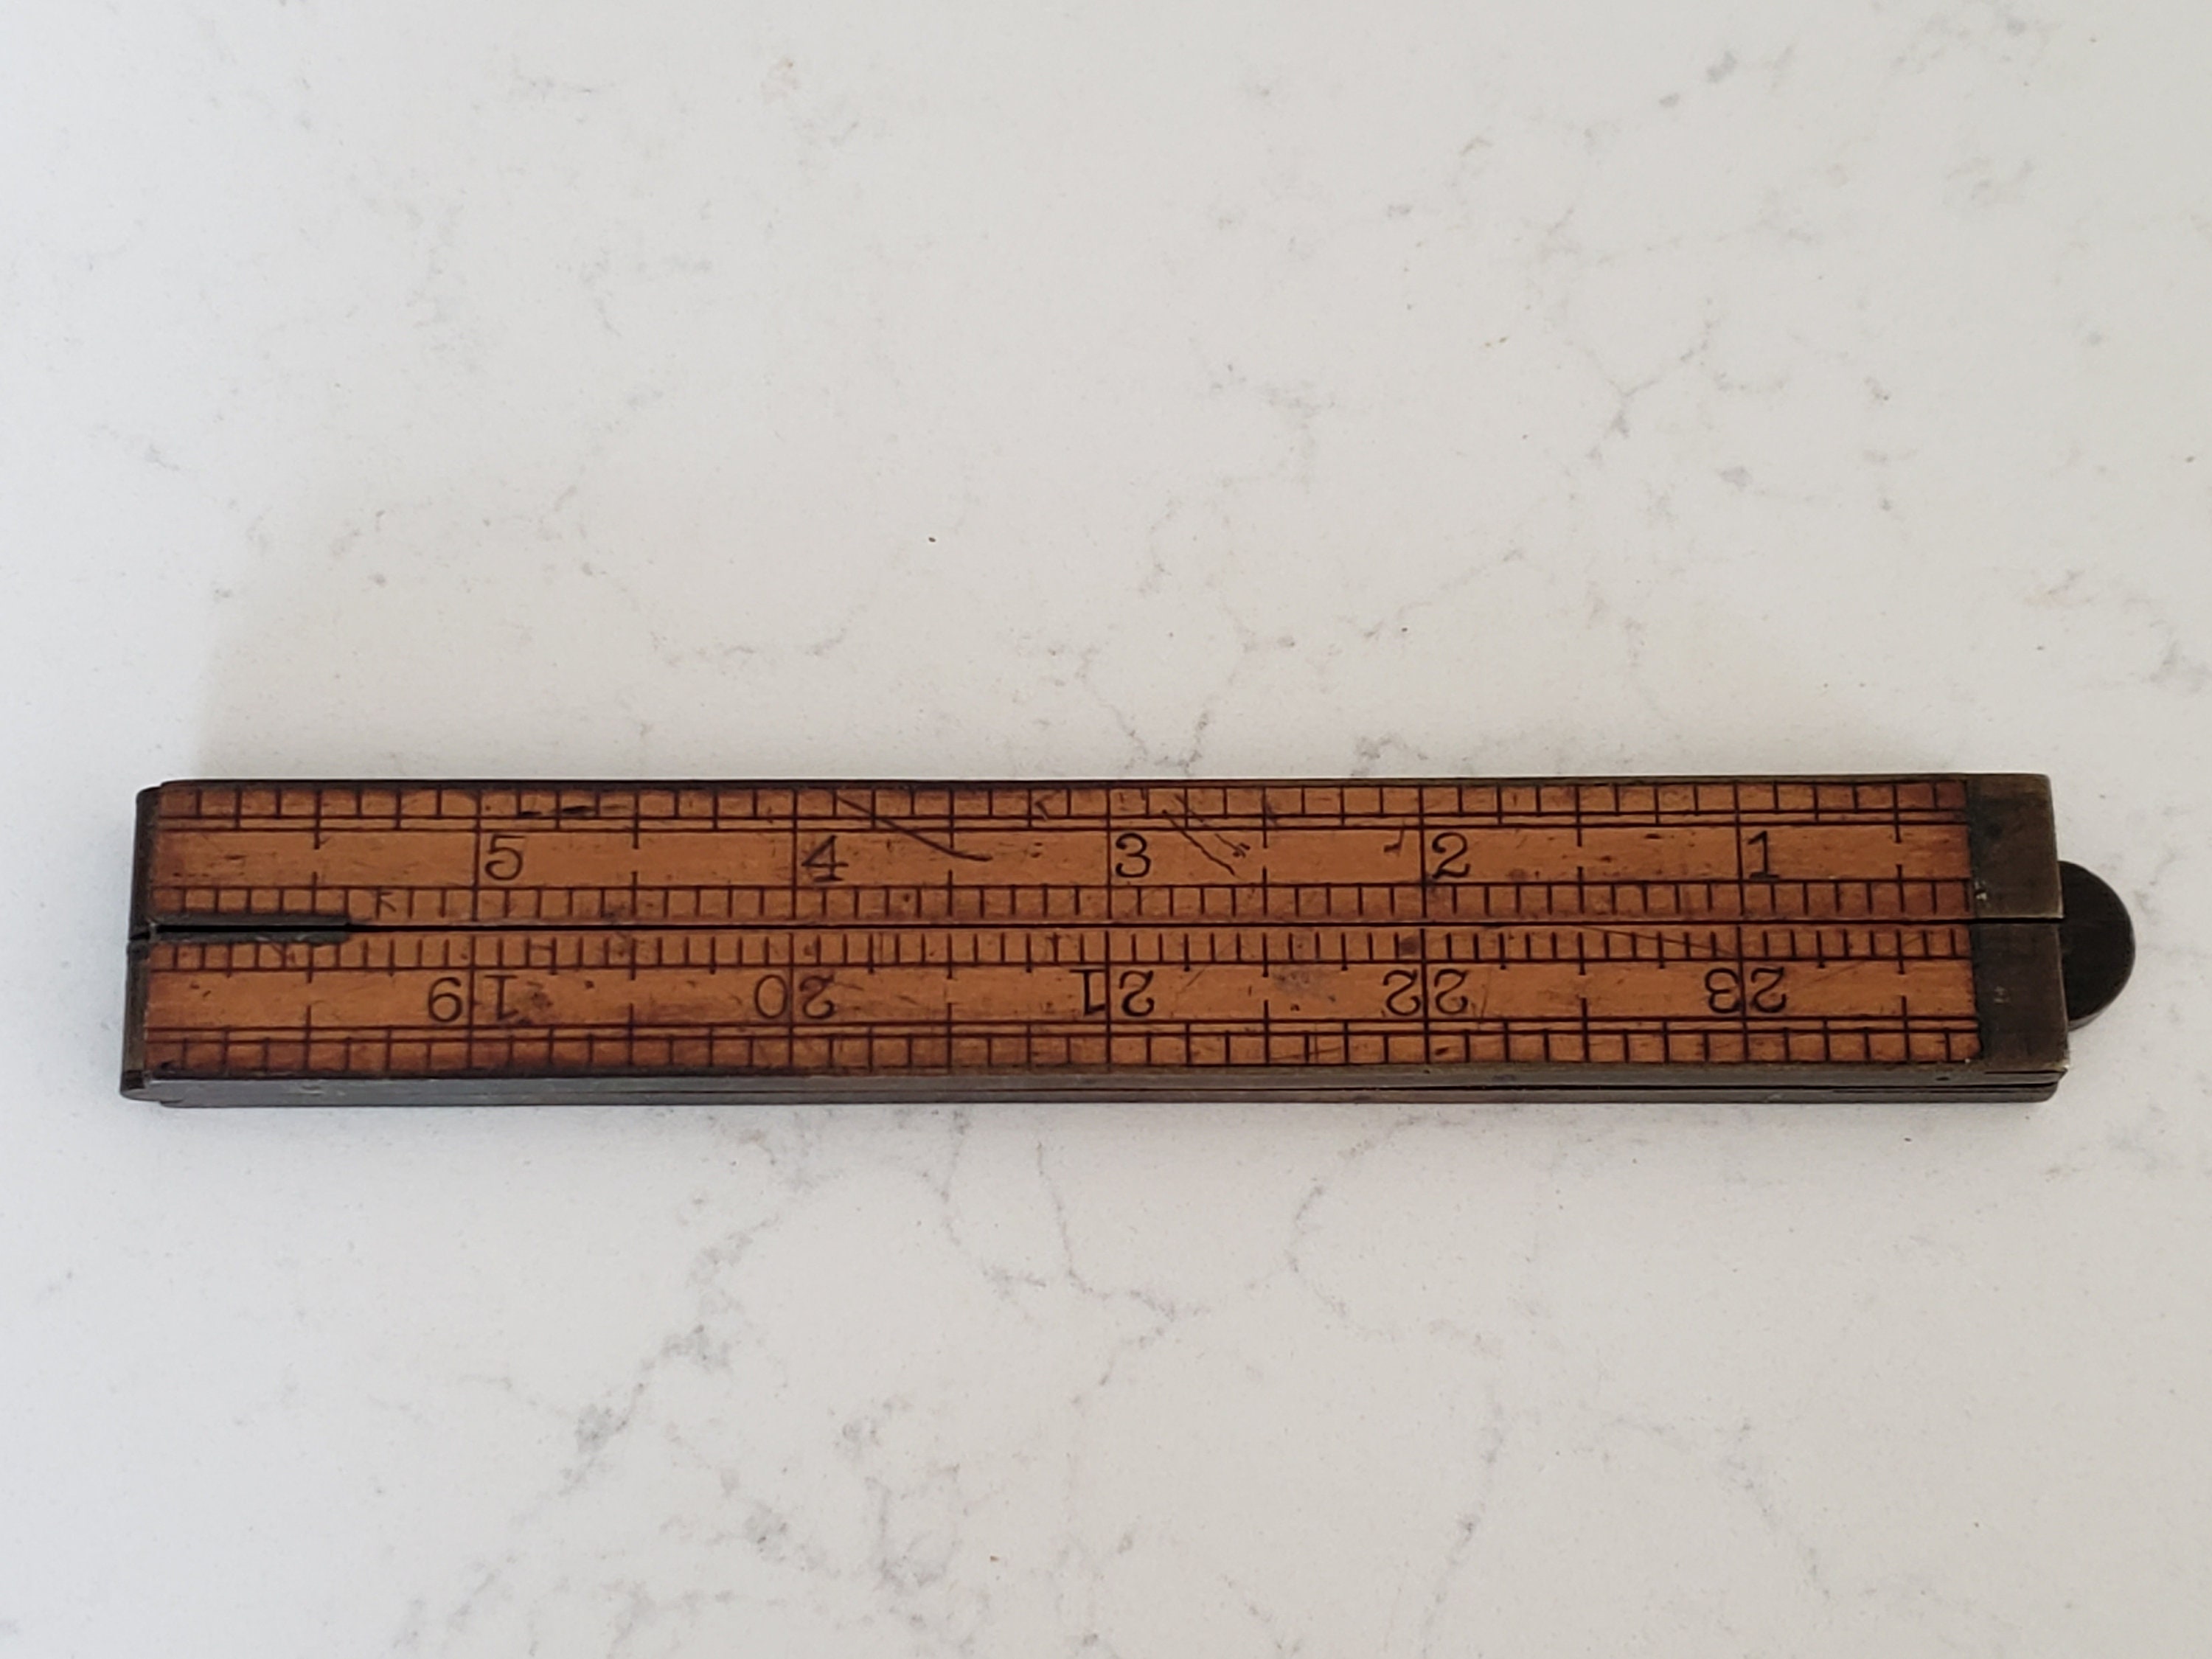 Vintage Brass Ruler - Imperial & Metric Measurements - Galen Leather